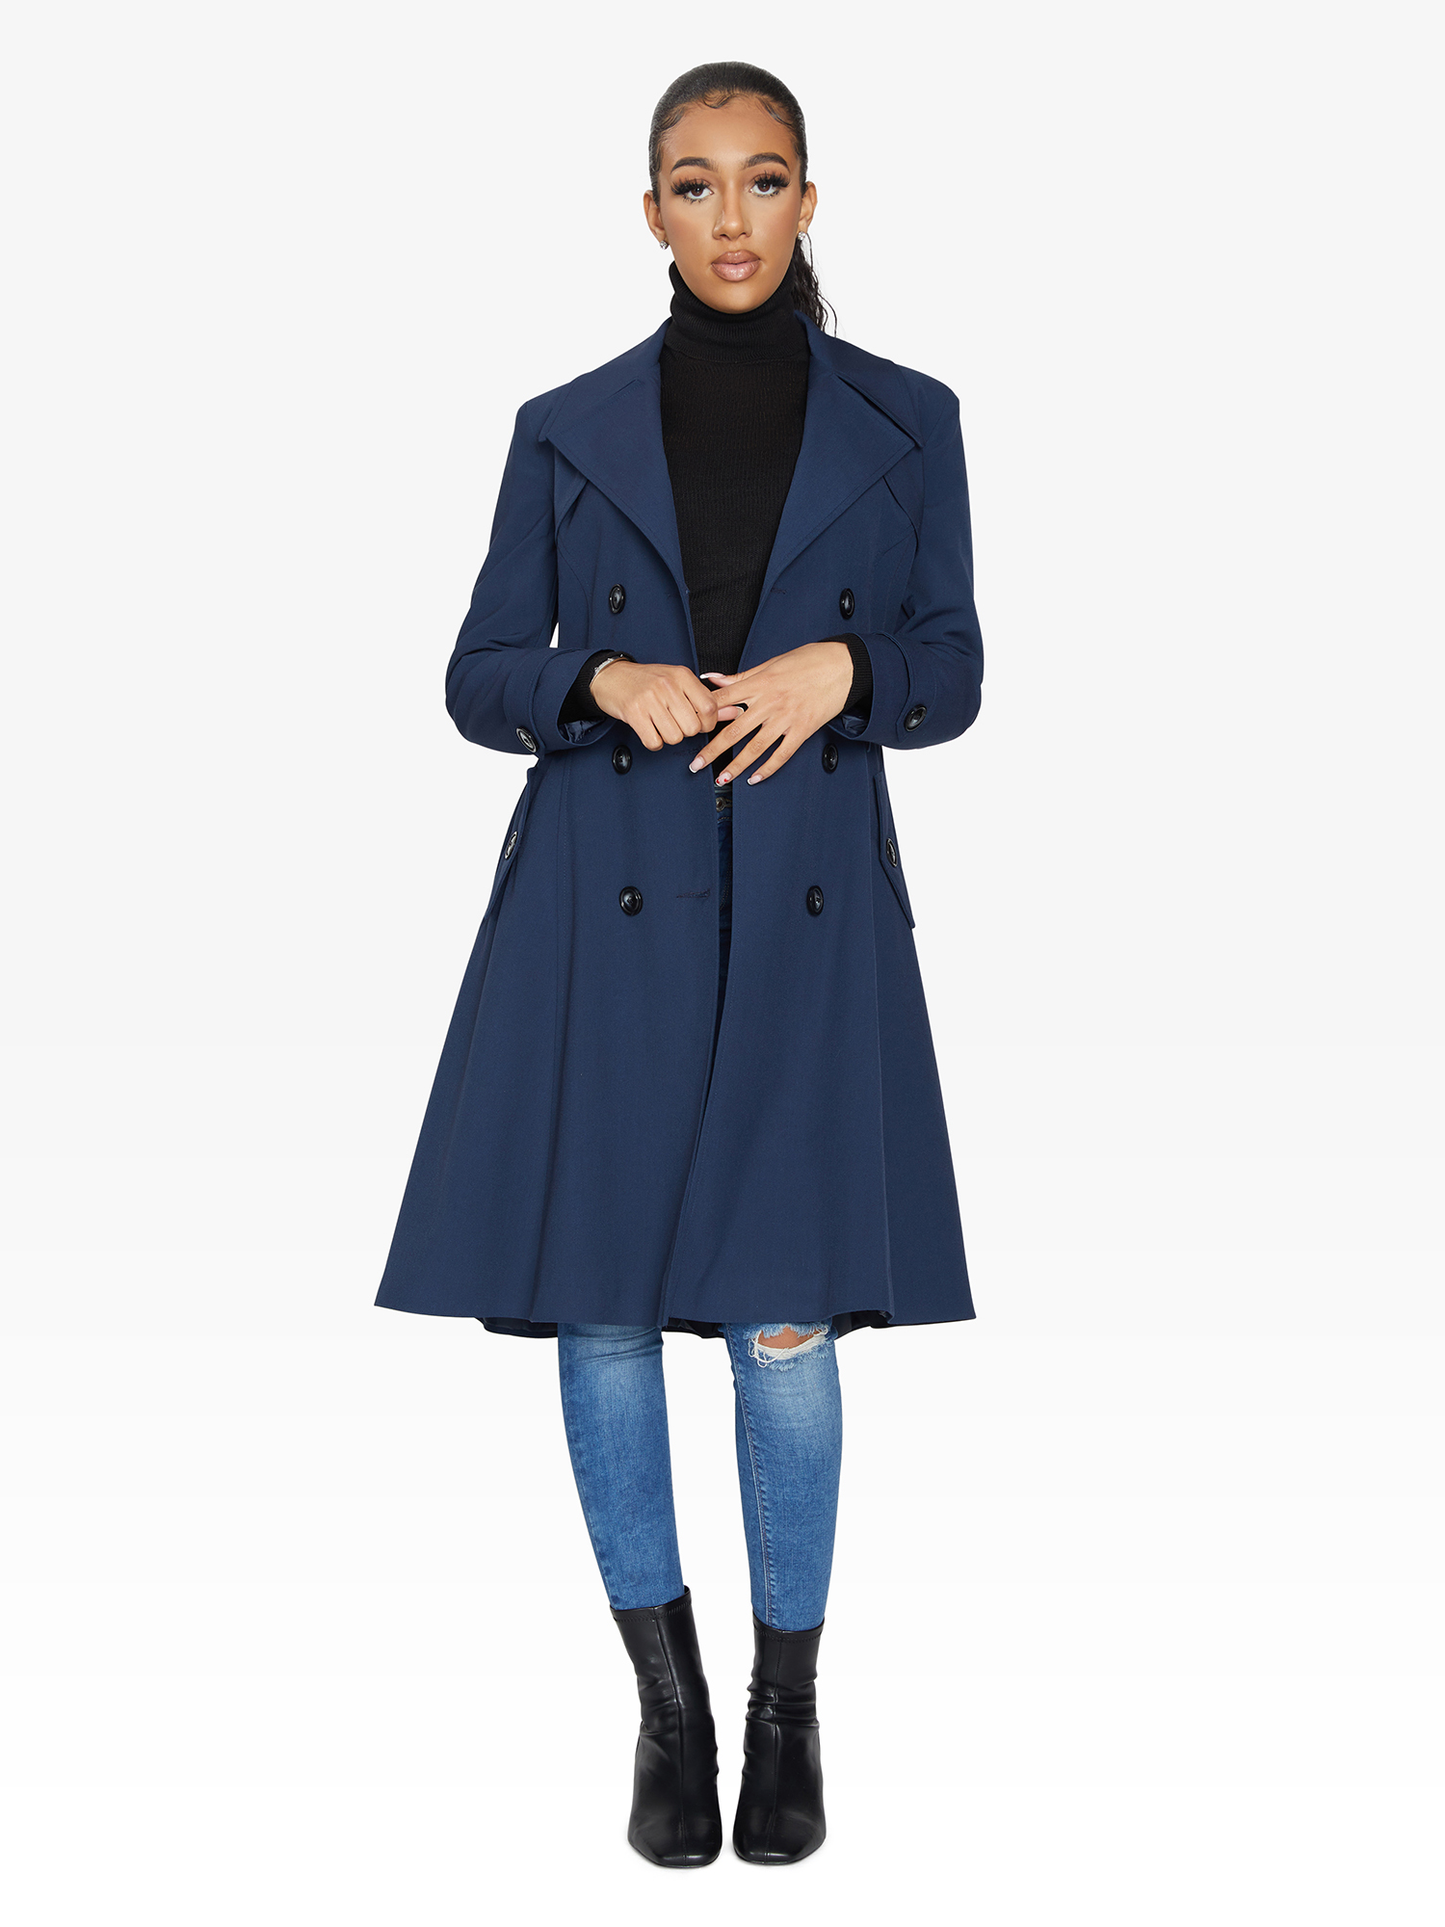 Spring/Summer Double Breasted Trench Mac Coat (1201-SP)